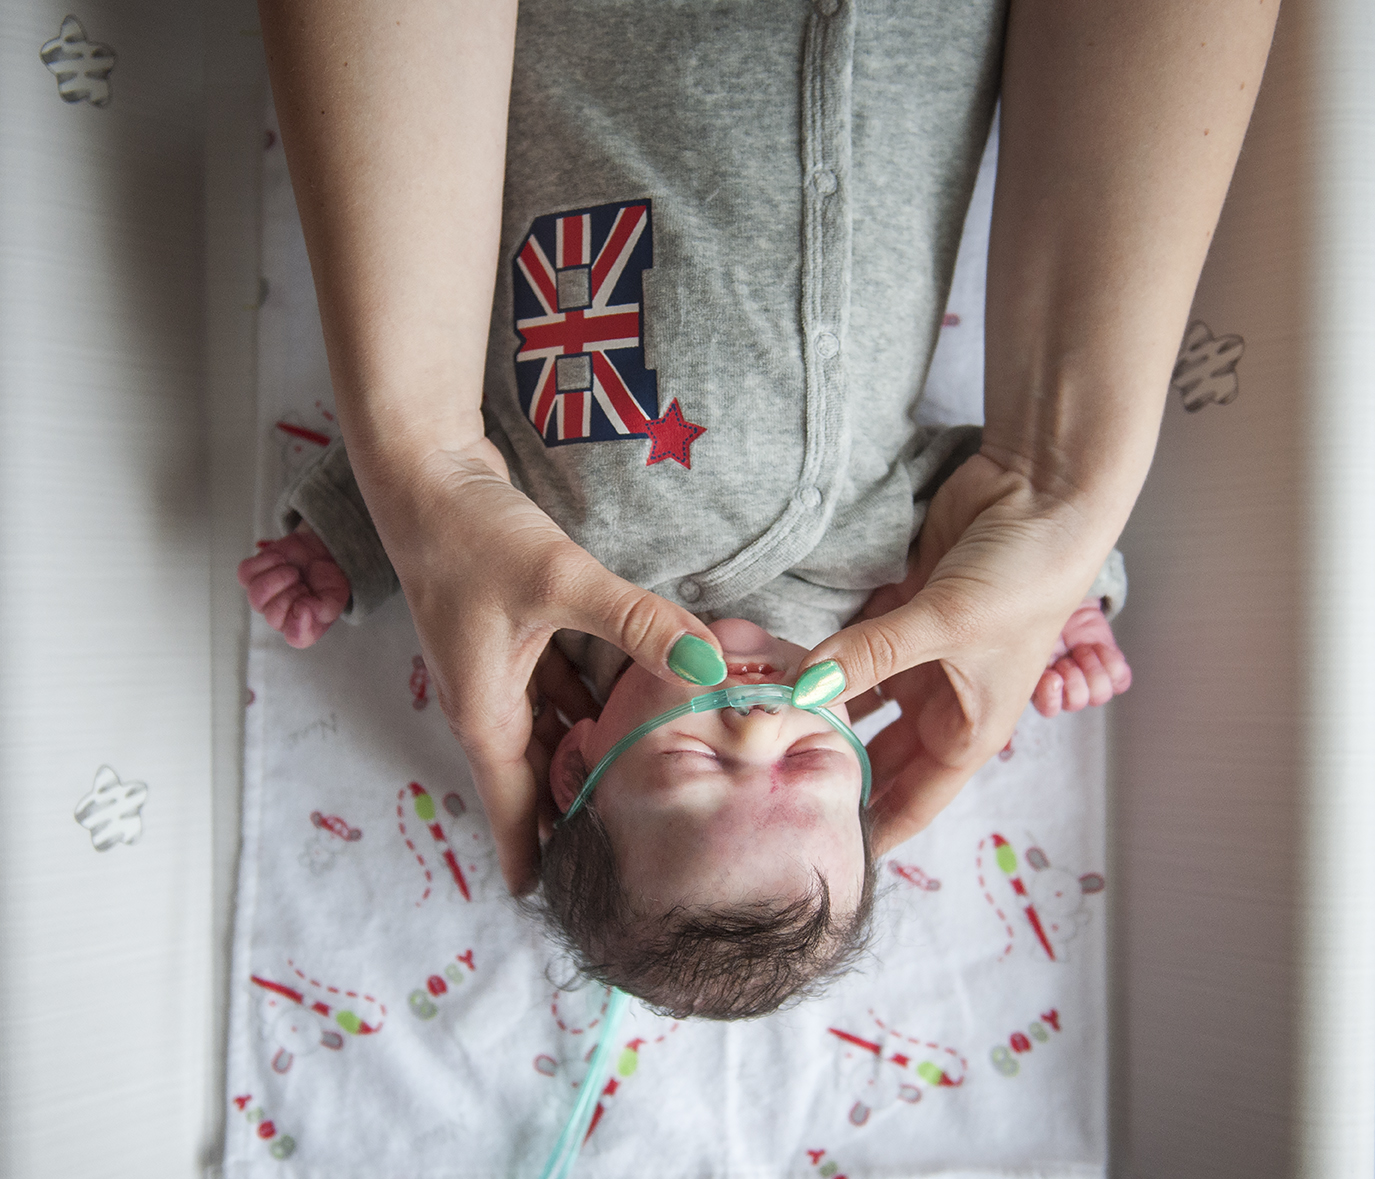  There are many reasons why women buy reborn dolls. One of them is the need to be needed and to have someone to look after. In this case the "child" is sick and needs to be taken care of. Many dolls are custom made so you can buy one with any kind of